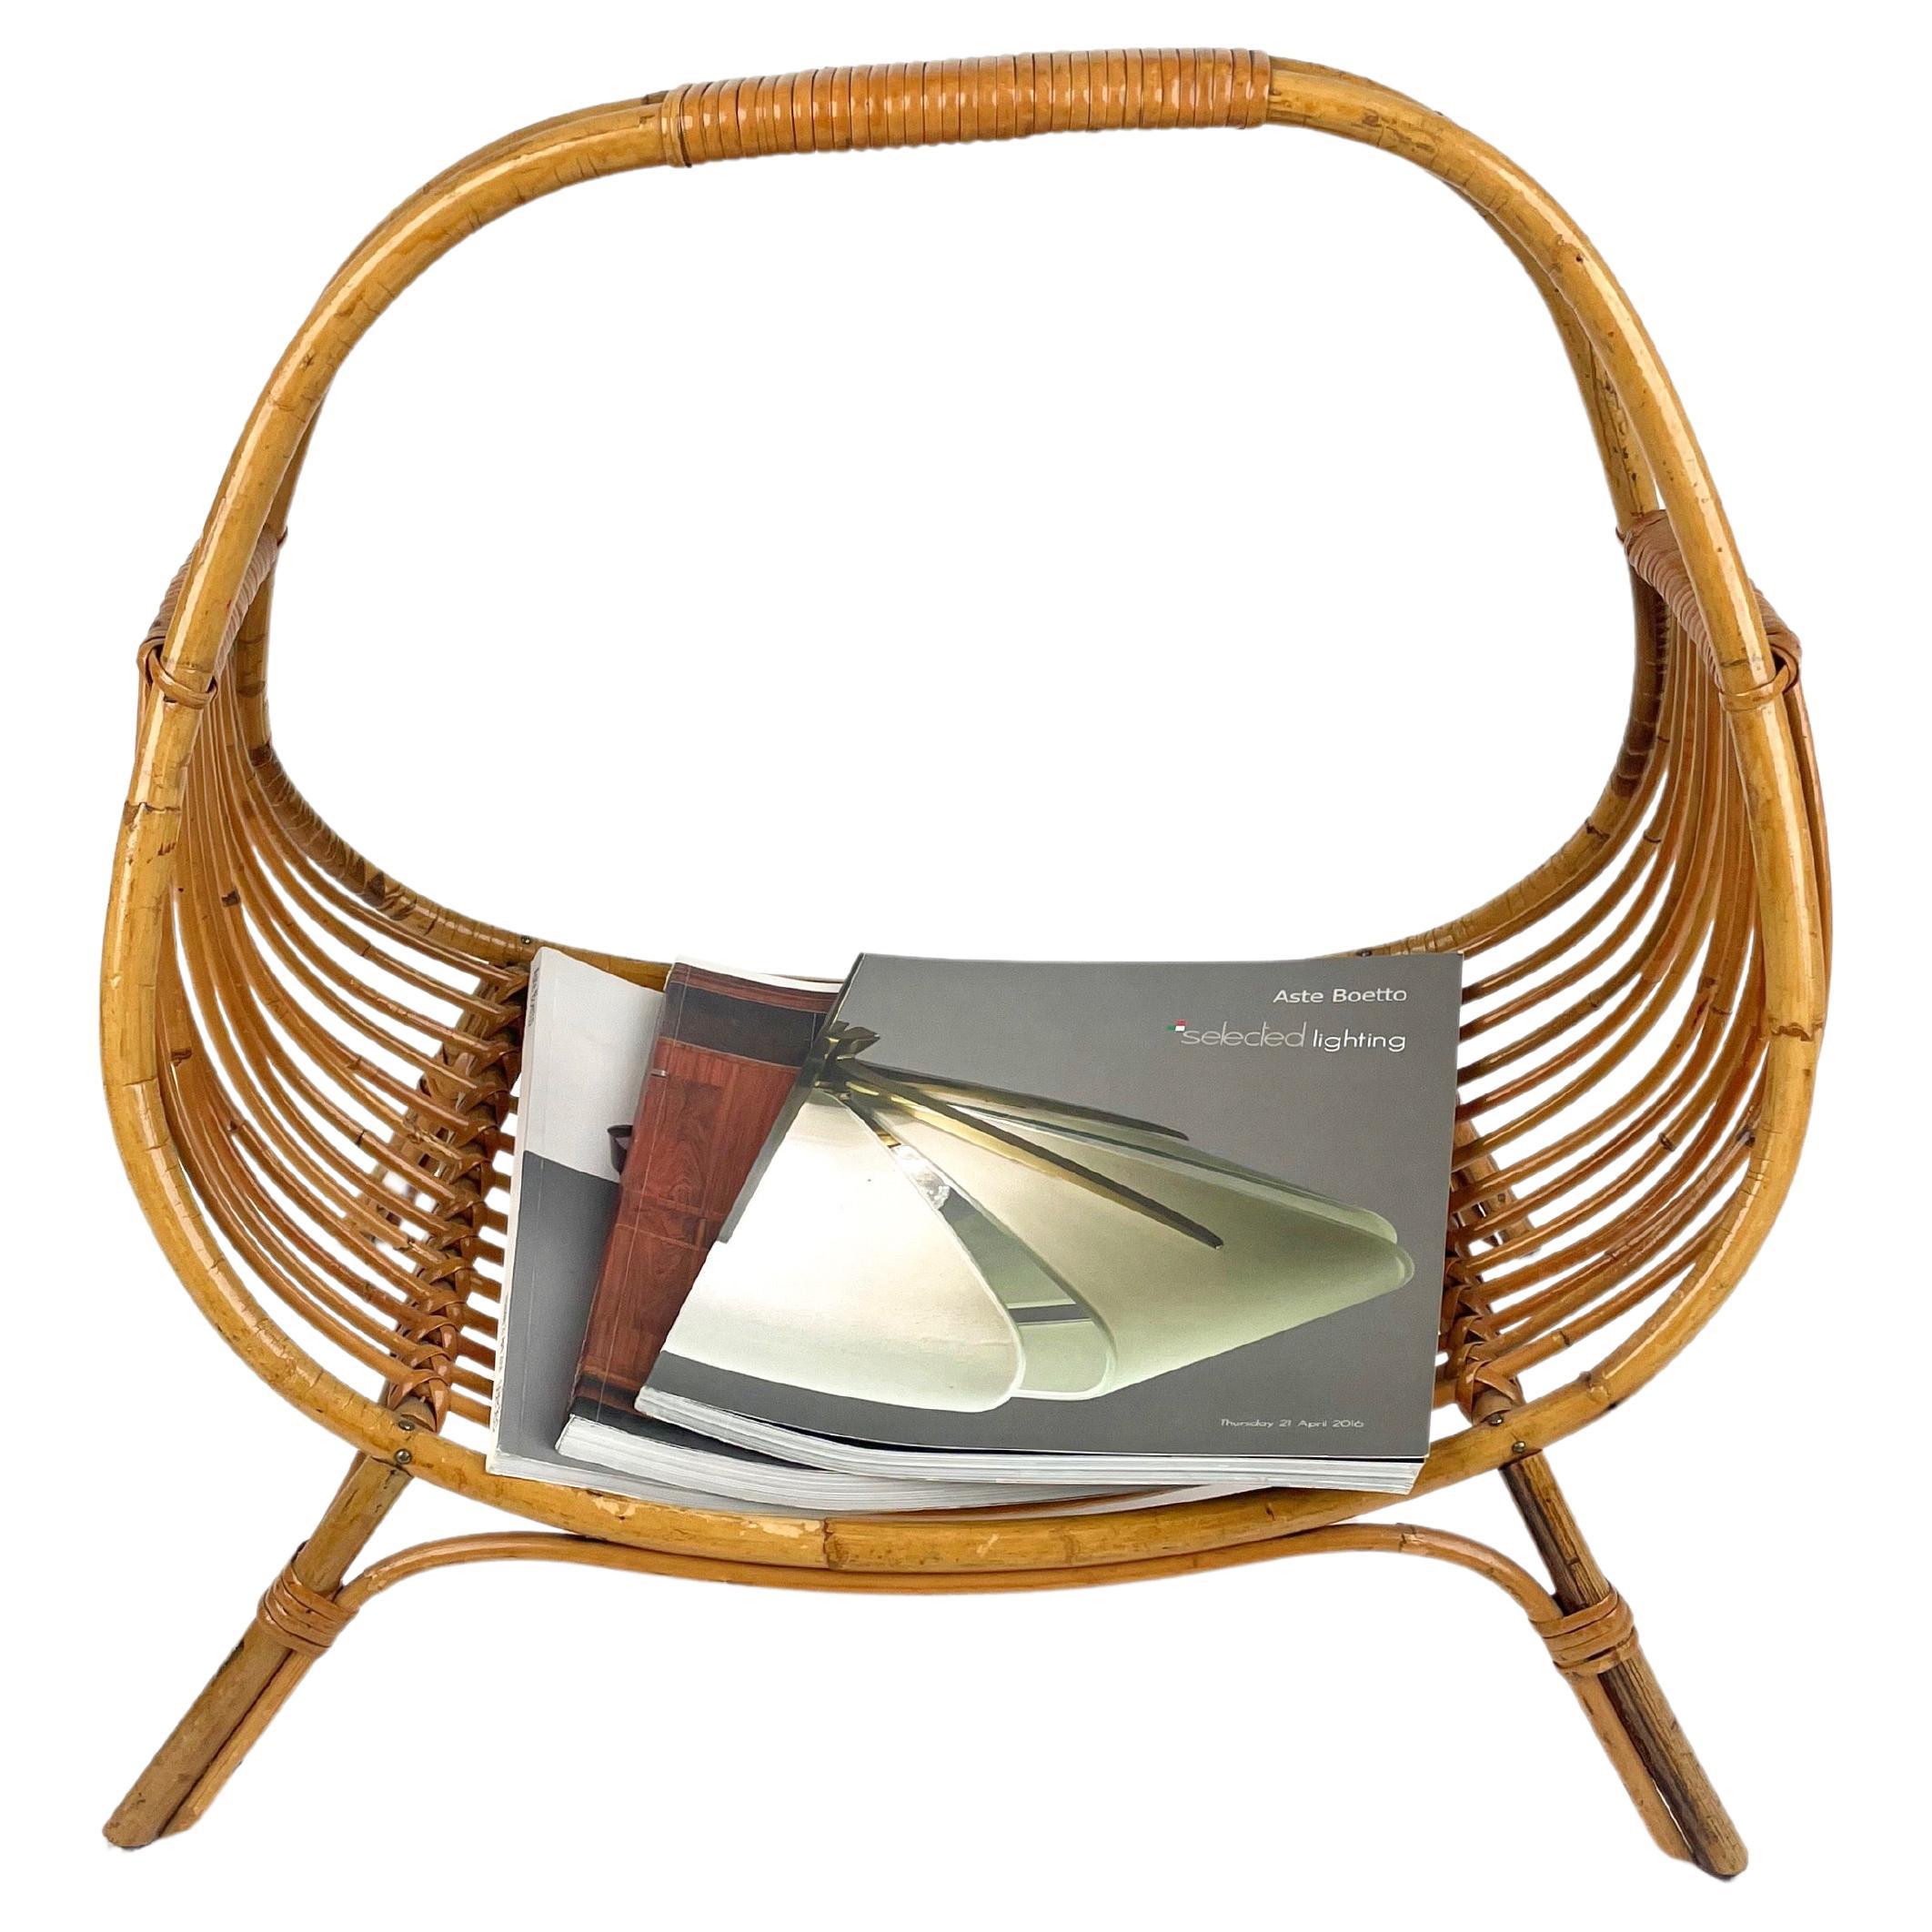 Magazine rack in bamboo and rattan, elevated and curved, made in Italy in the 1960s.

An astonishing piece that will enrich a midcentury-style living room or studio.